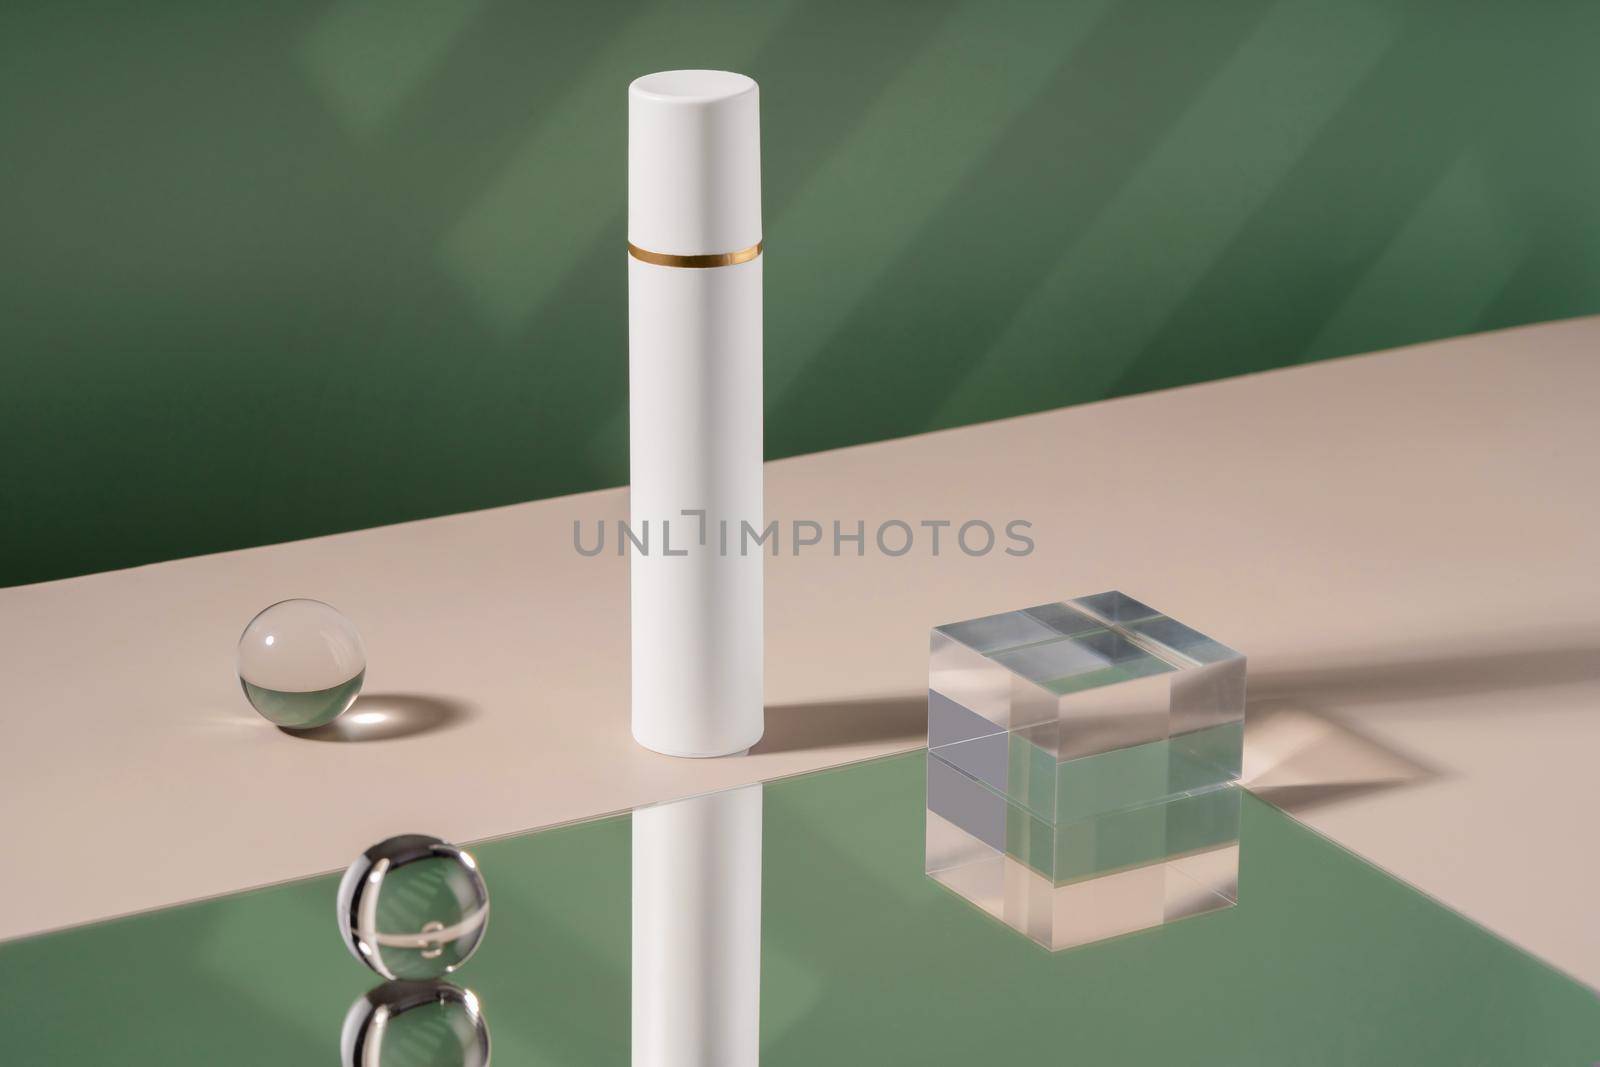 Cosmetic cream bottle mockup showcase product presentation with stylish props. Display mock up for advertising, cosmetics stand, branding scene with ball mirror, shadow light on green backdrop